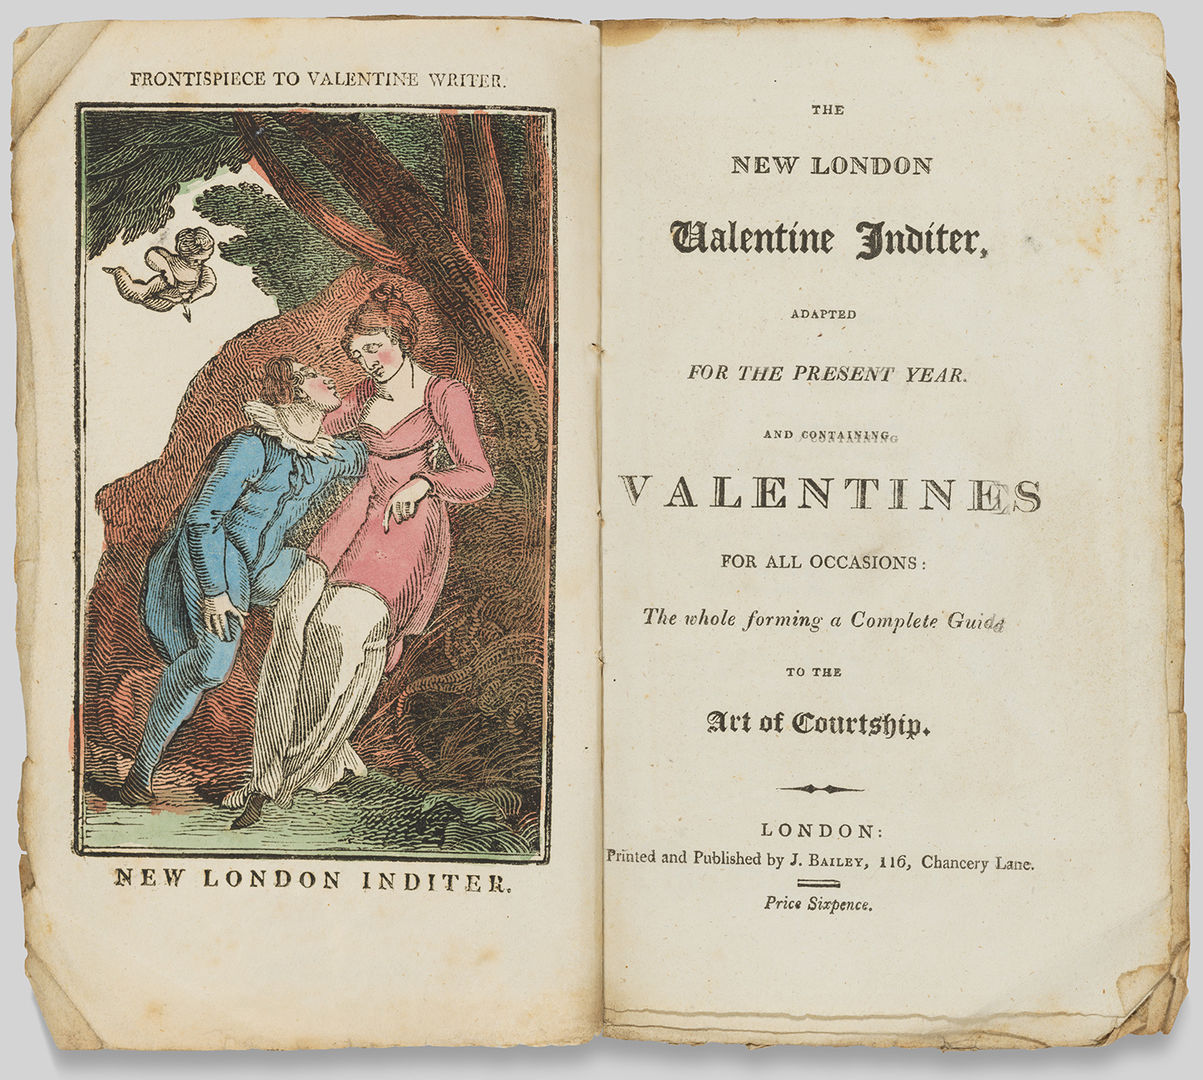 A book is opened to the frontispiece and title page. The frontispiece shows a blushing couple entangled at the base of a tree. 